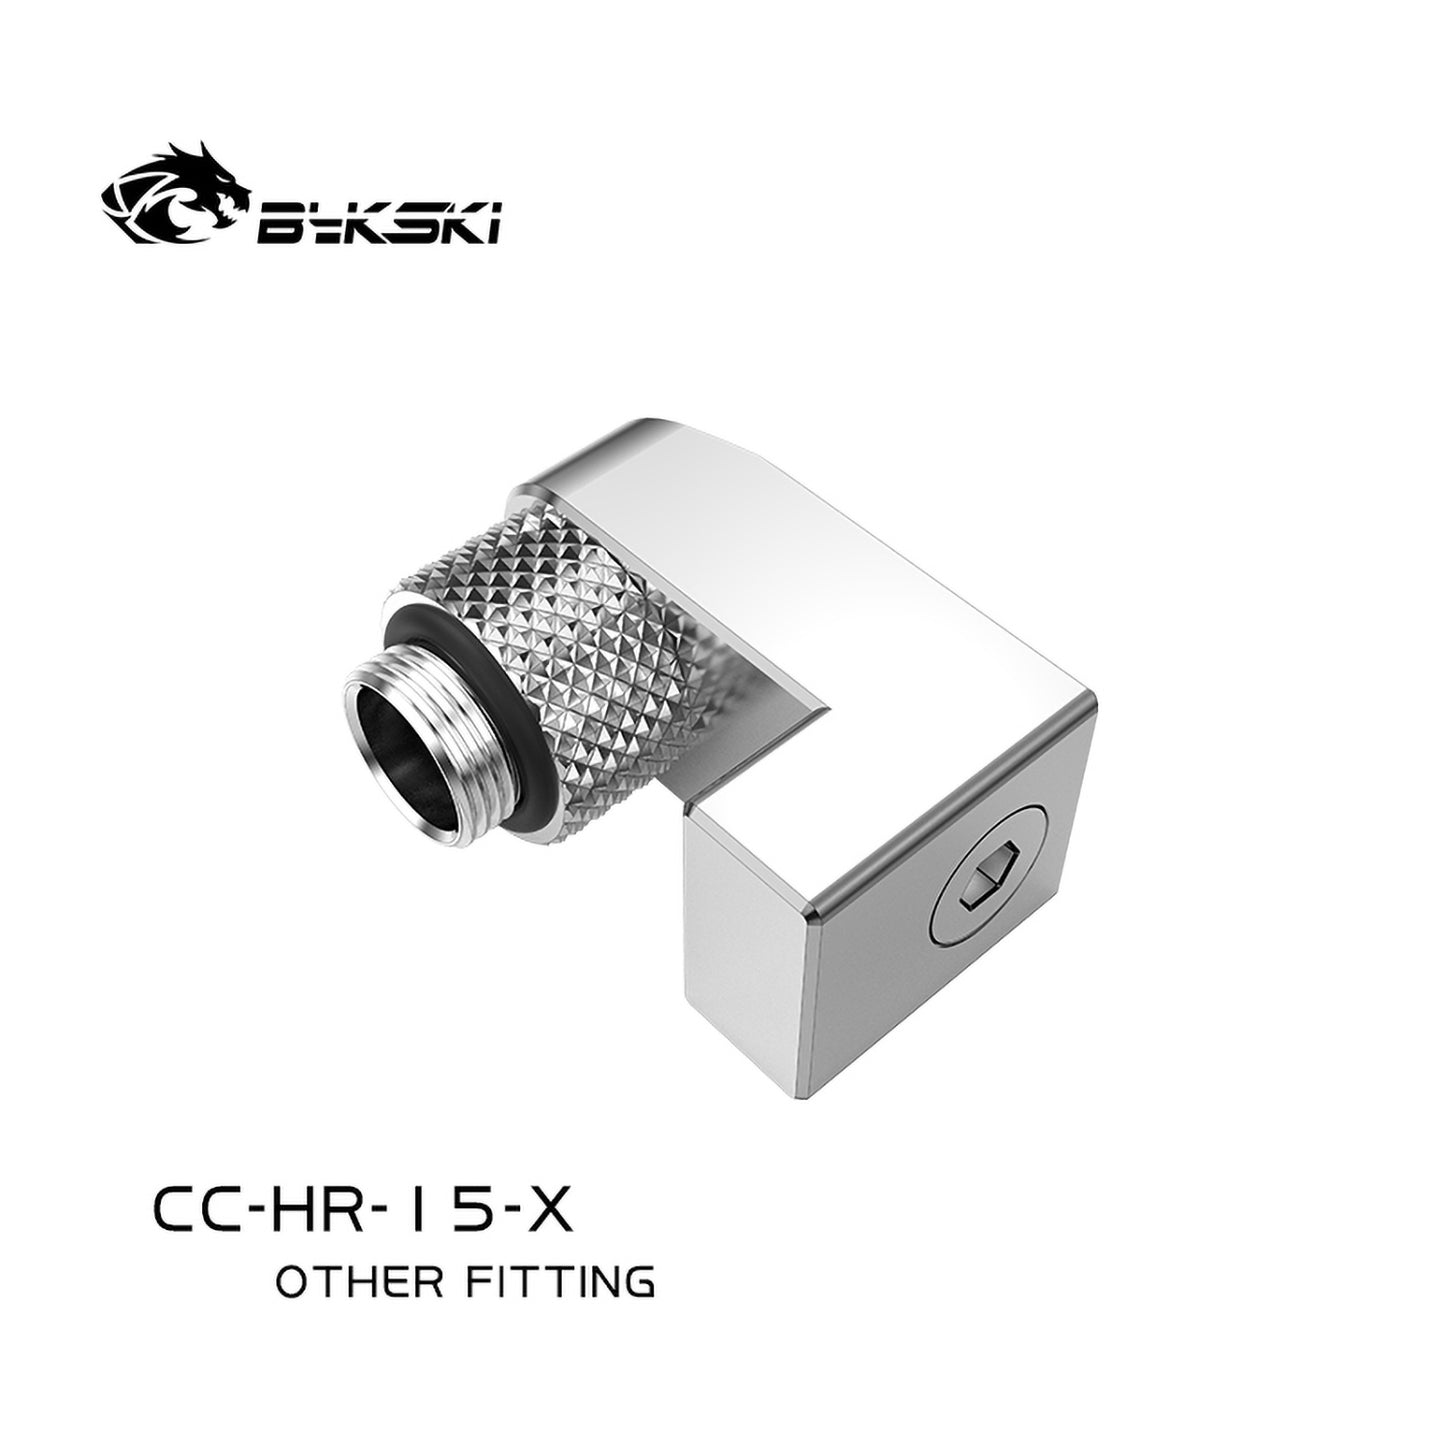 Bykski 15mm Offset Fitting, G1/4" Rotatable Adapter, Water Cooling Connector, CC-HR-15-X